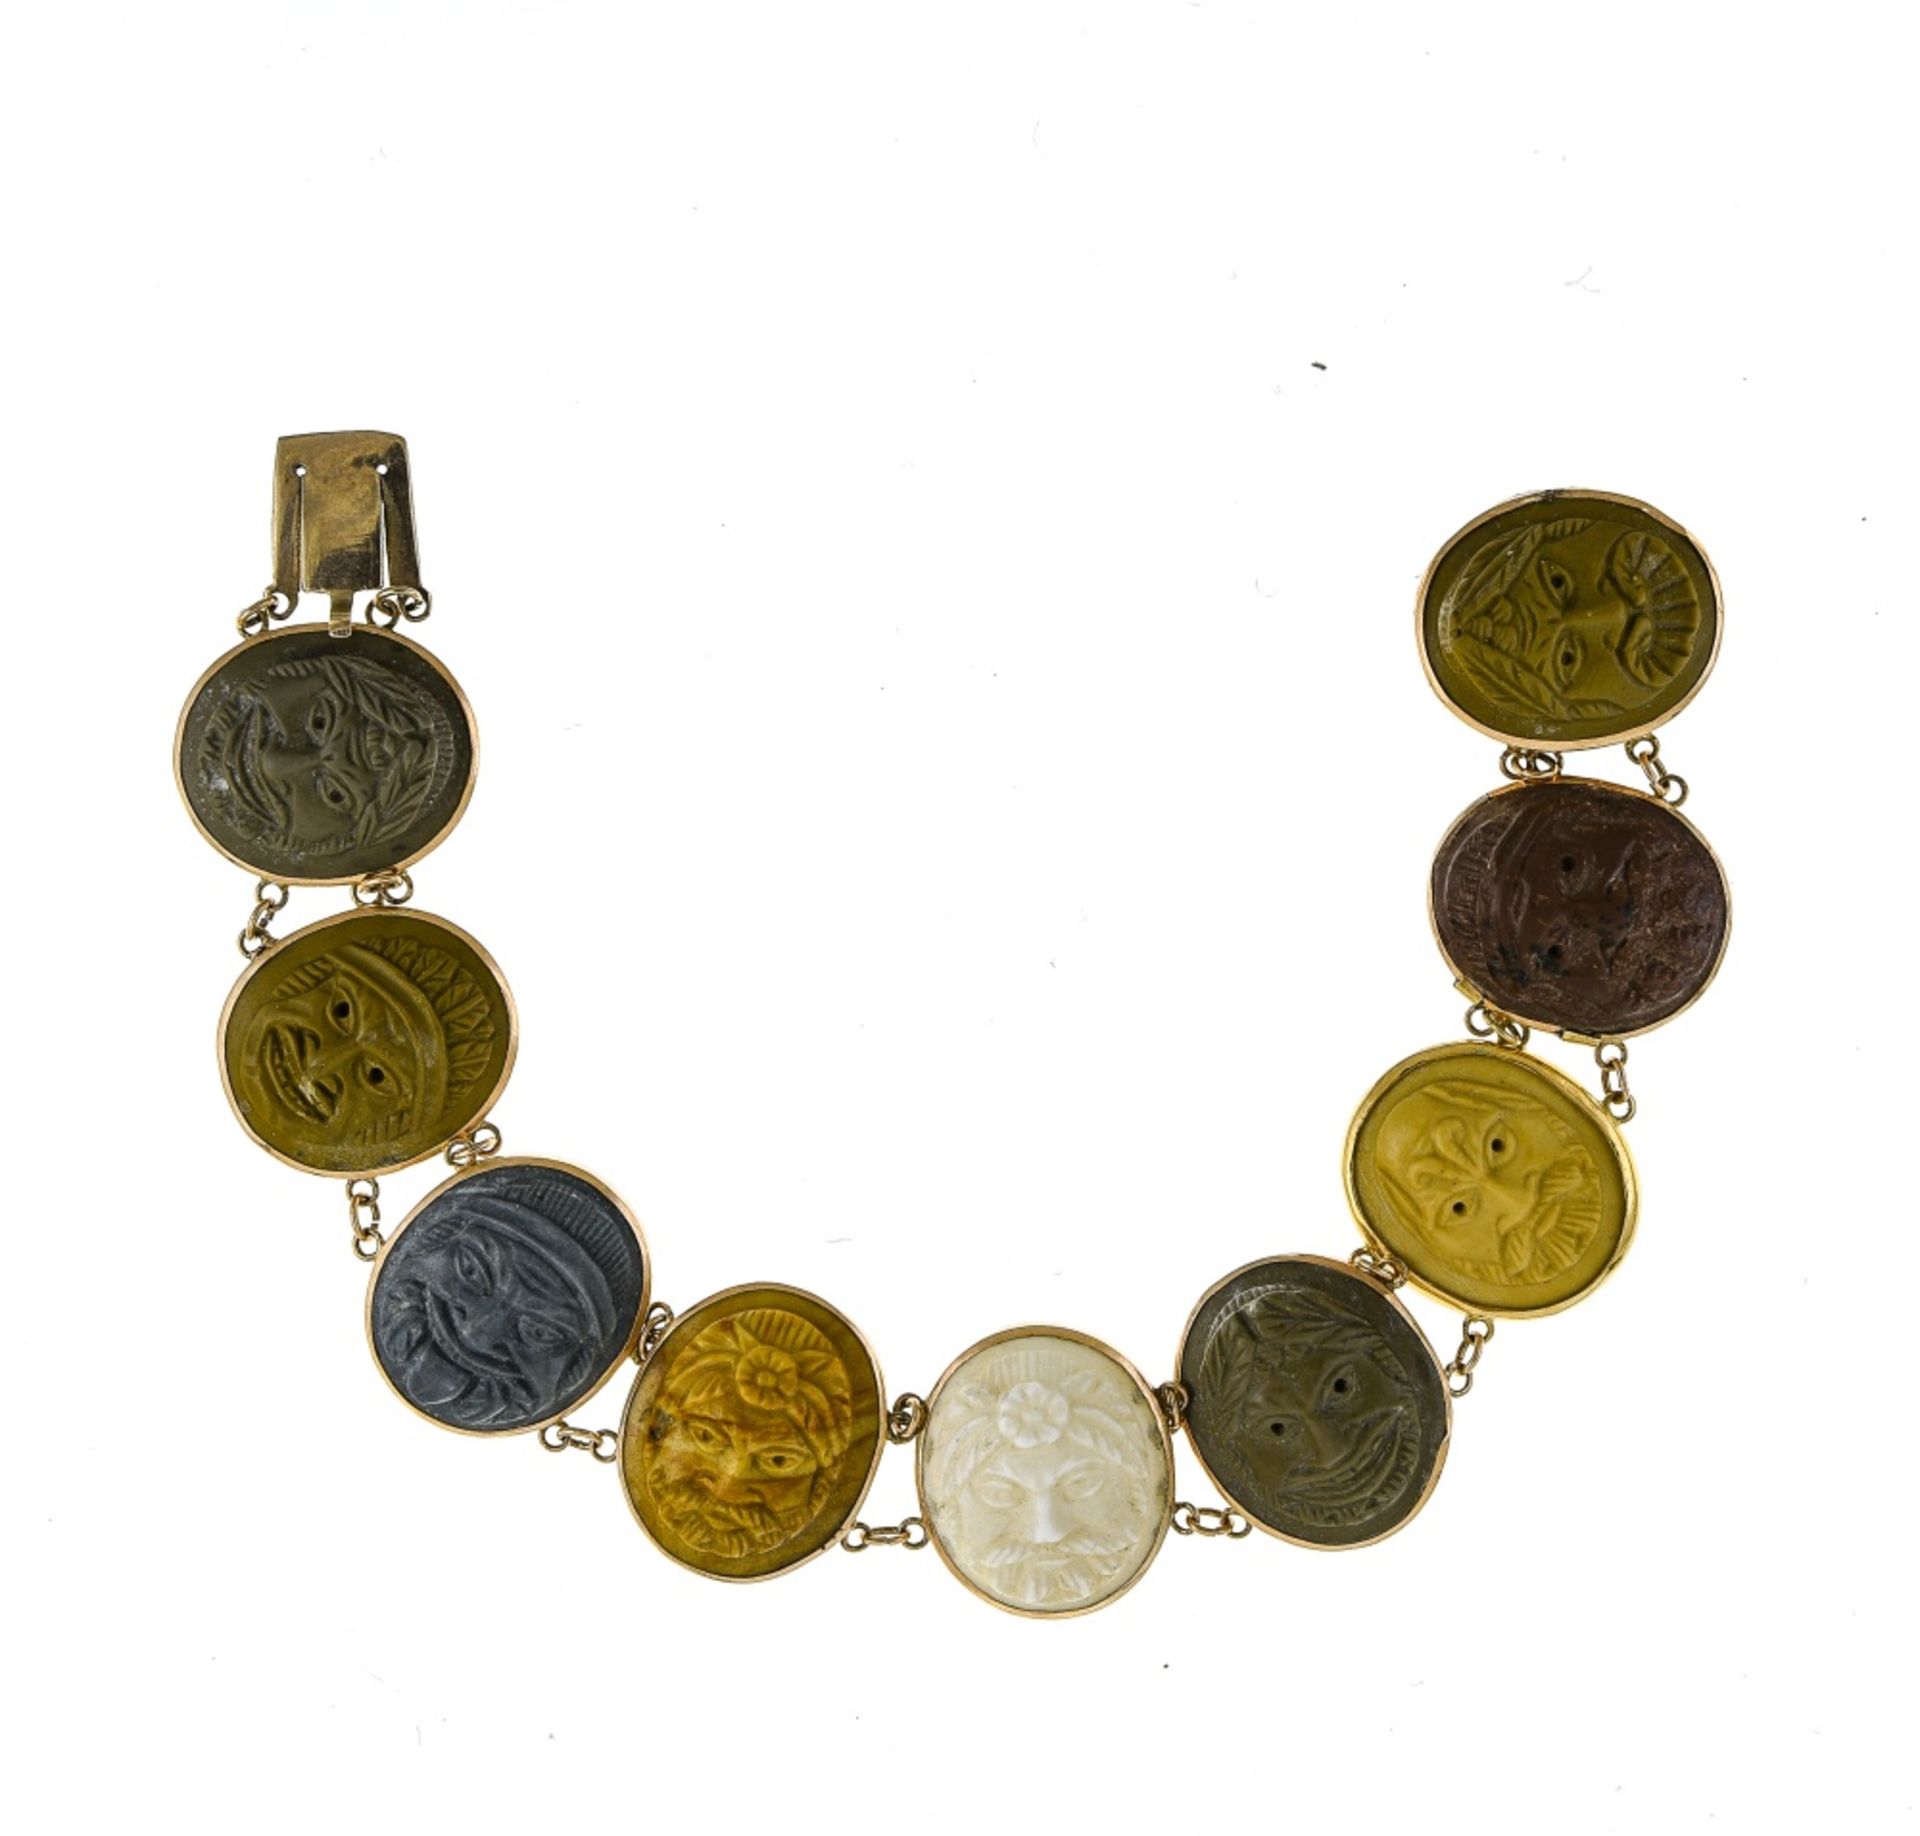 Lava stone bracelet 18 kt yellow gold, composed of 9 medallions set with lava stone cameos of - Image 2 of 3